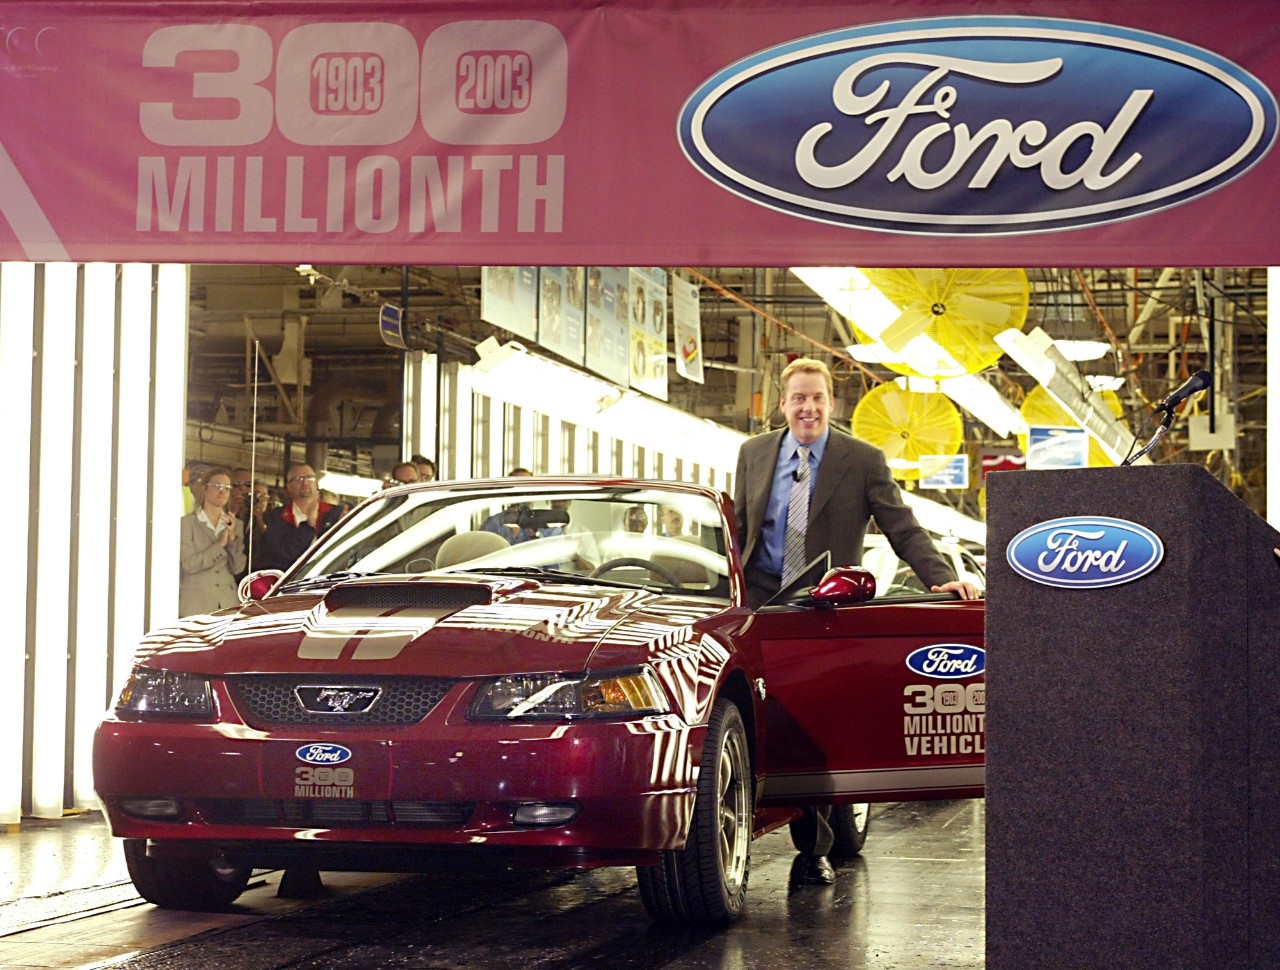 The 300 millionth Mustang rolls off the factory line with Bill Ford leading the way